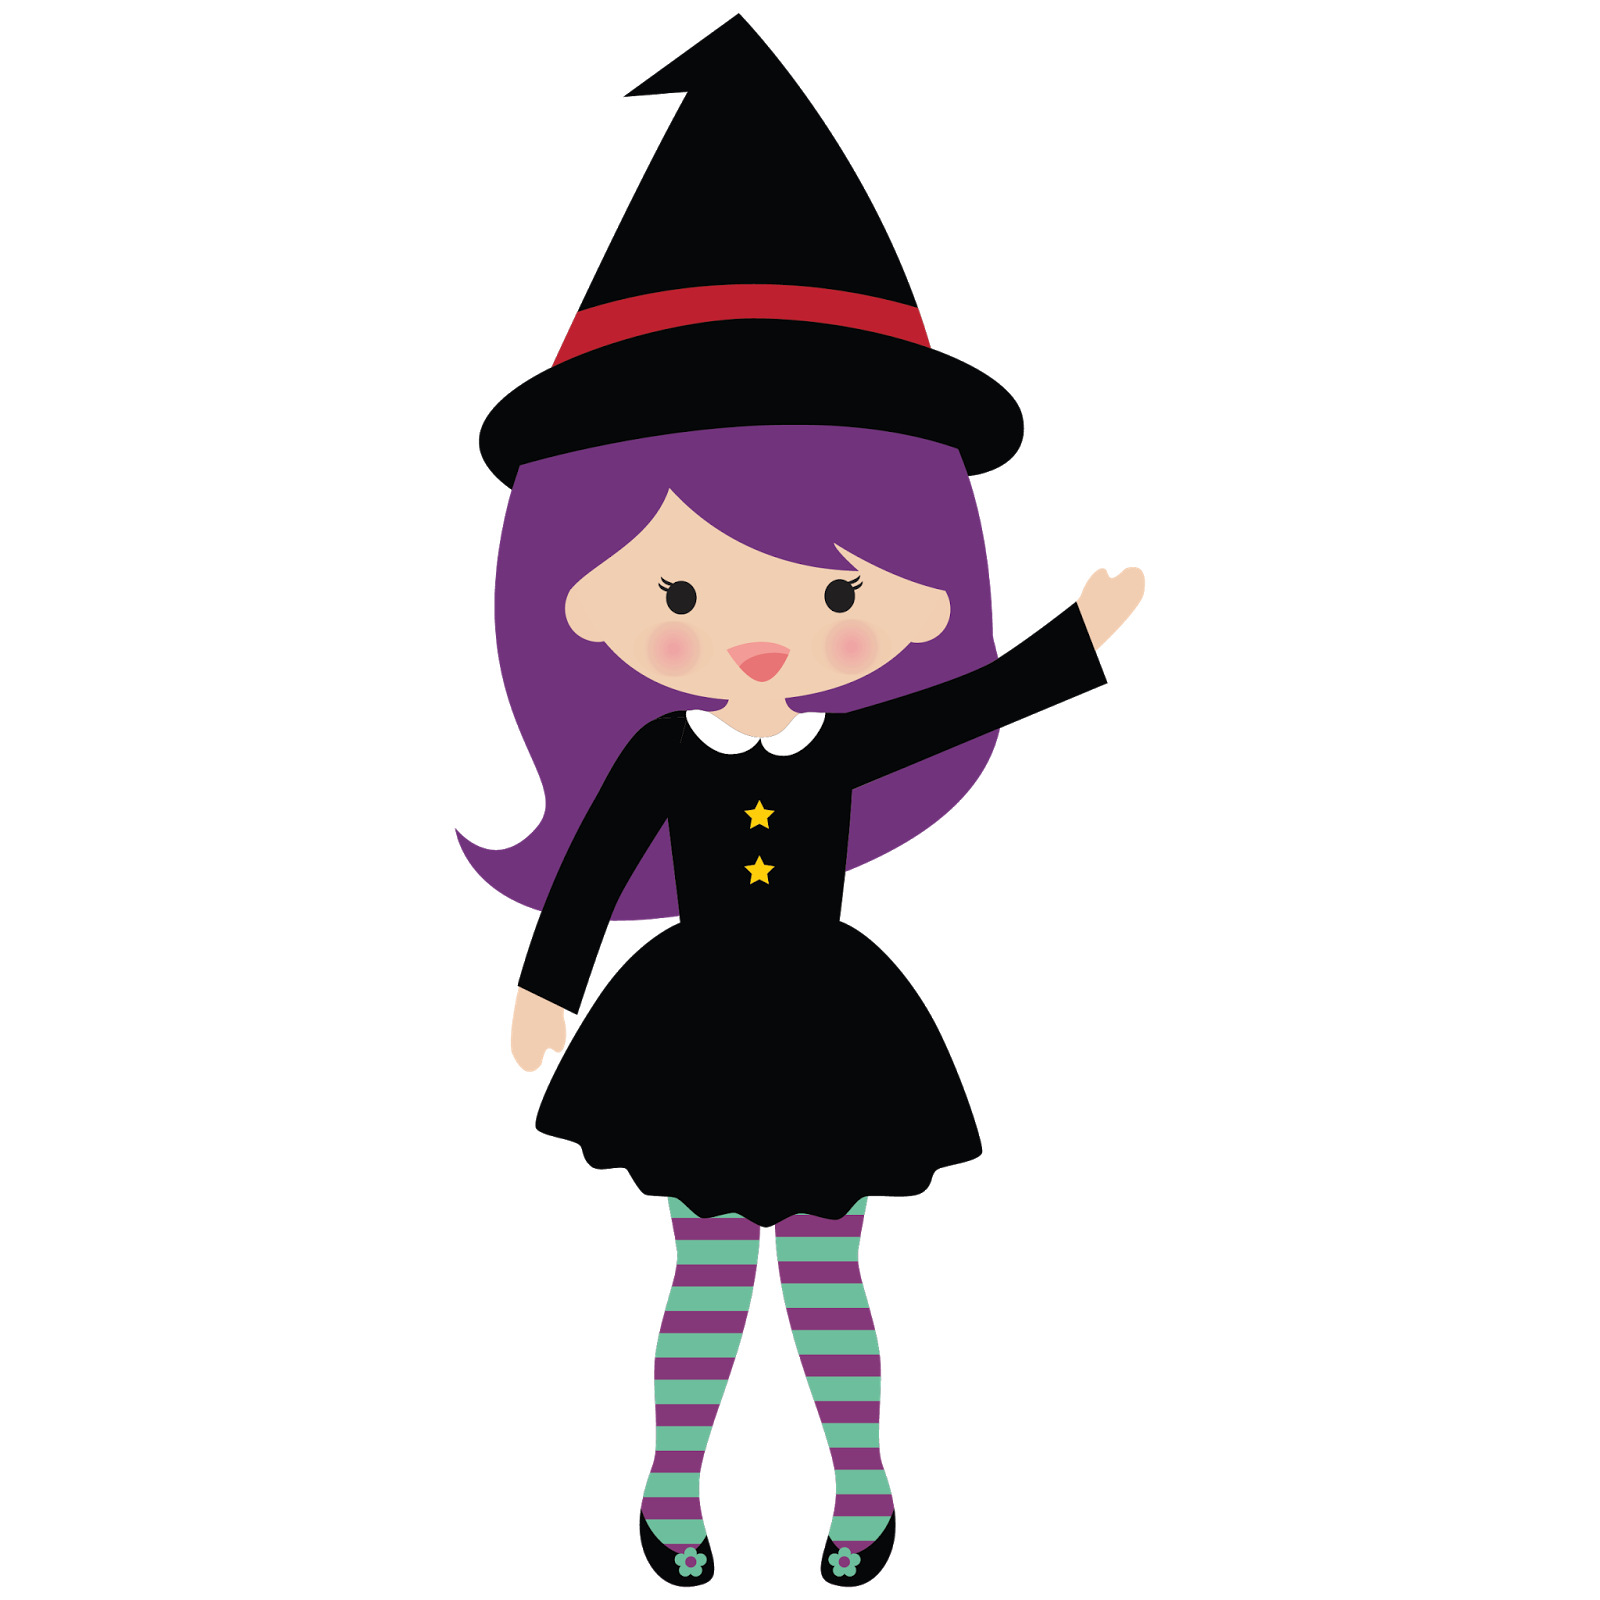 ... cute witch - character of